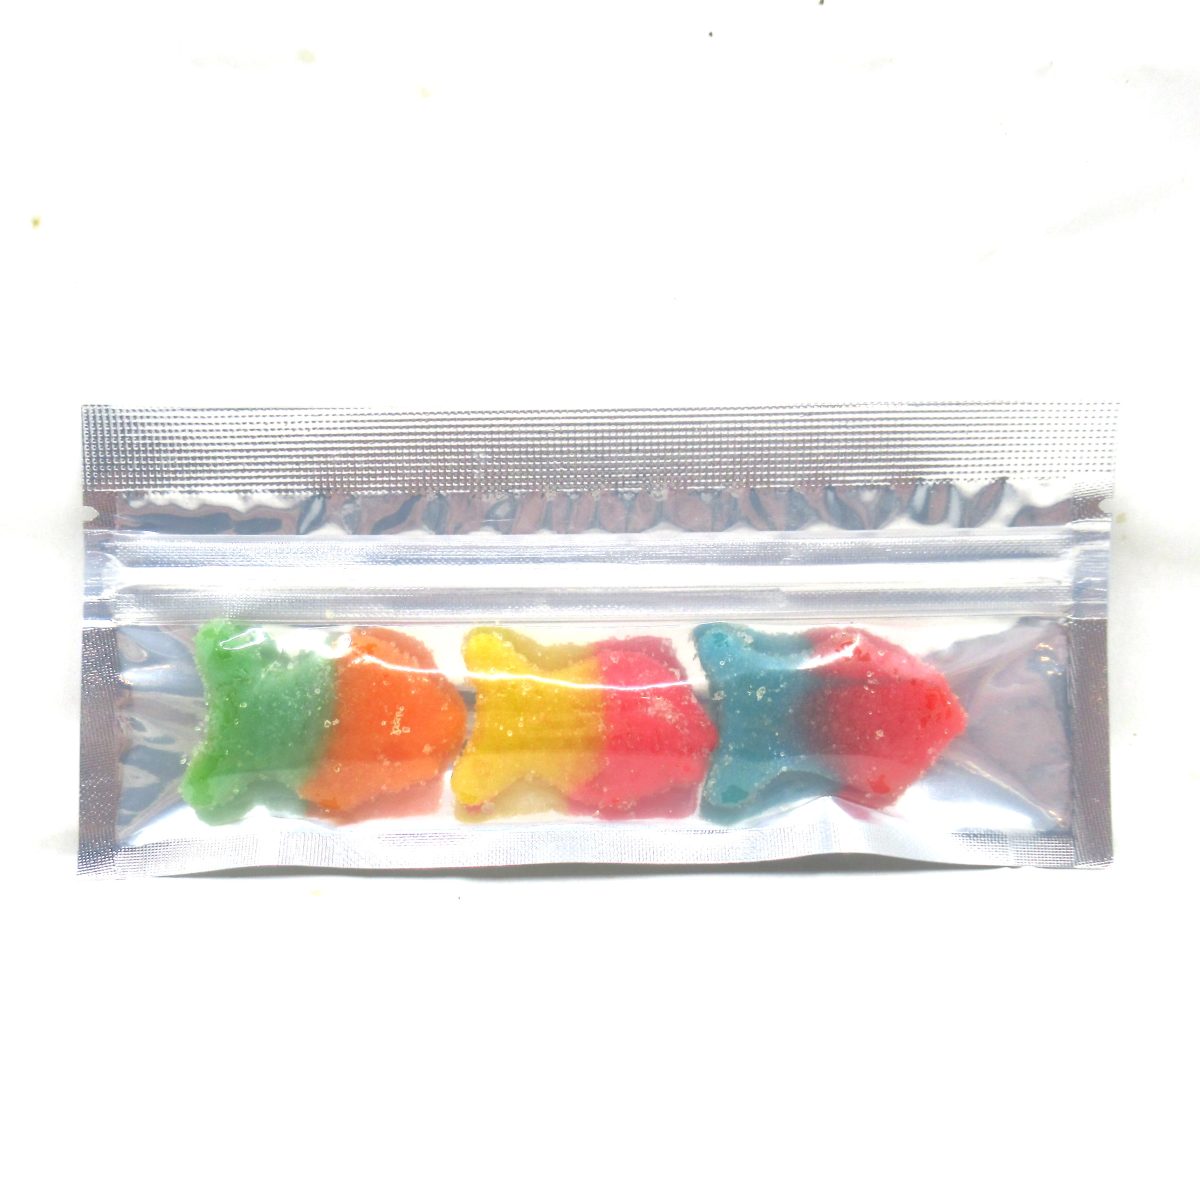 True North - 3 Fishes 450mg THC